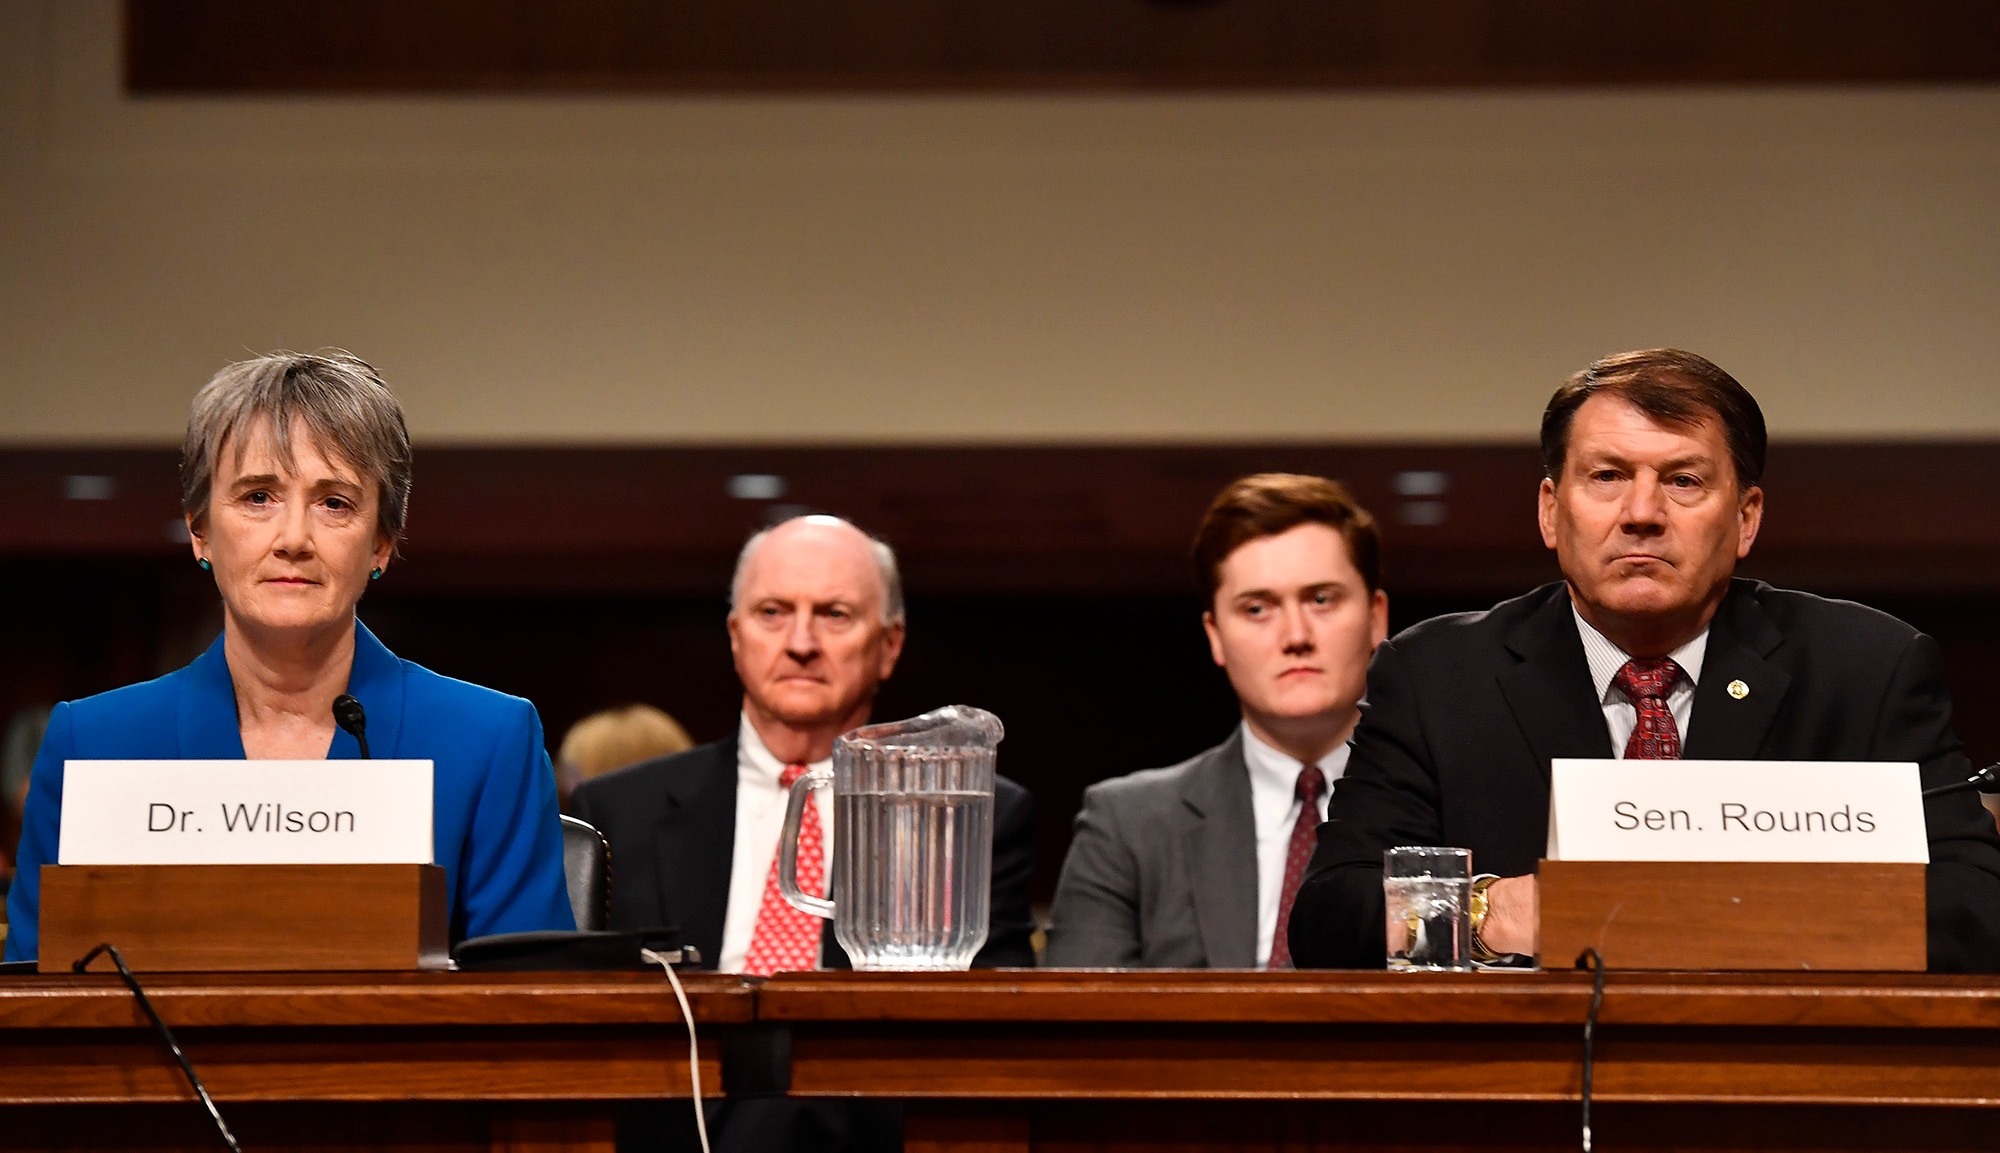 Secretary of the Air Force nominee Heather Wilson testifies before the Senate Armed Services Committee, as a part of the confirmation process March 30, 2017, in Washington, D.C.  In her opening statement, Wilson said, "We have the liberty to enjoy our blessings because thousands of America's best citizens volunteer to protect the rest of us."  (U.S. Air Force photo/Scott M. Ash)